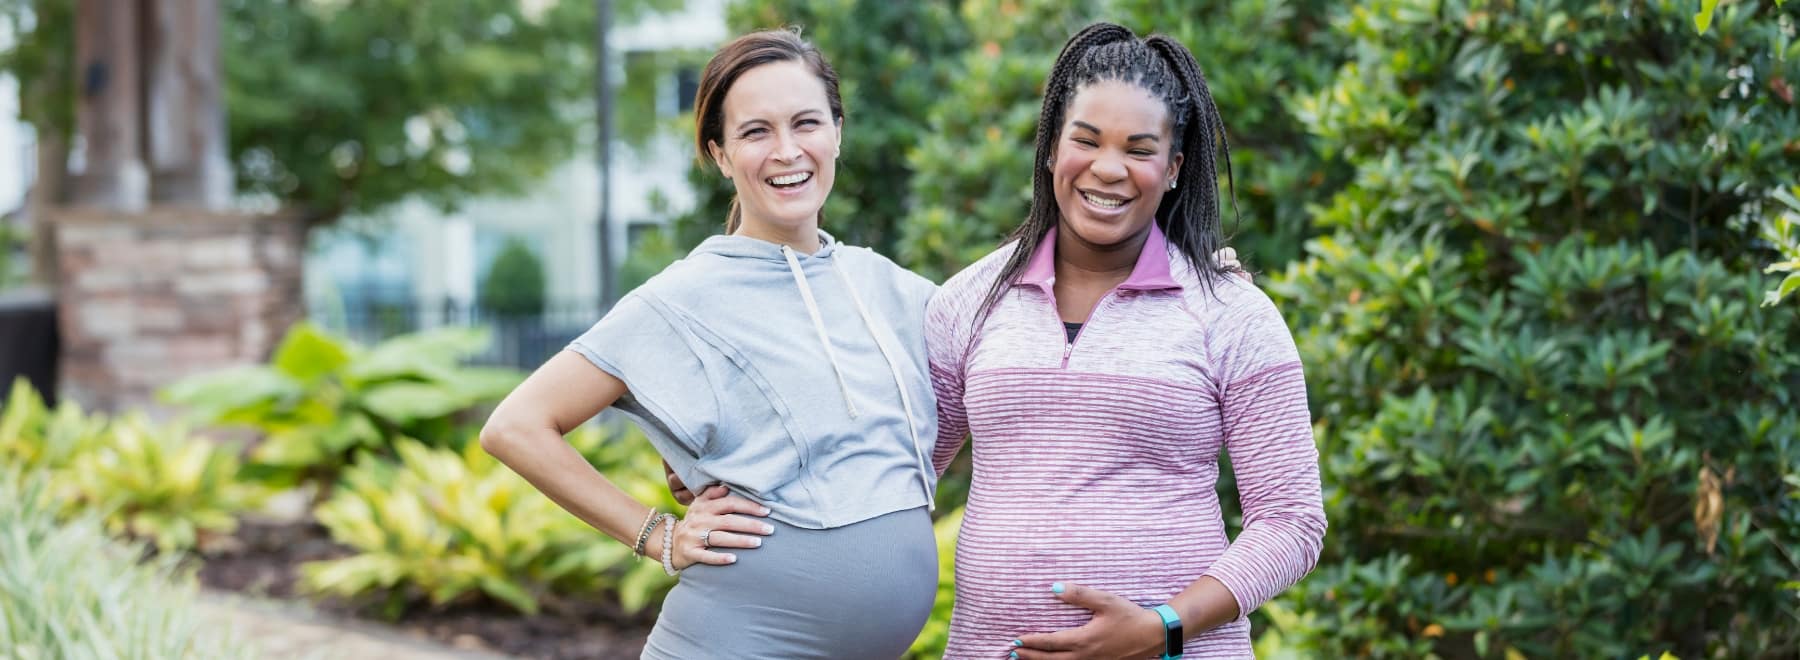 Two pregnant women in exercise clothing smile while posing for a picture in a park